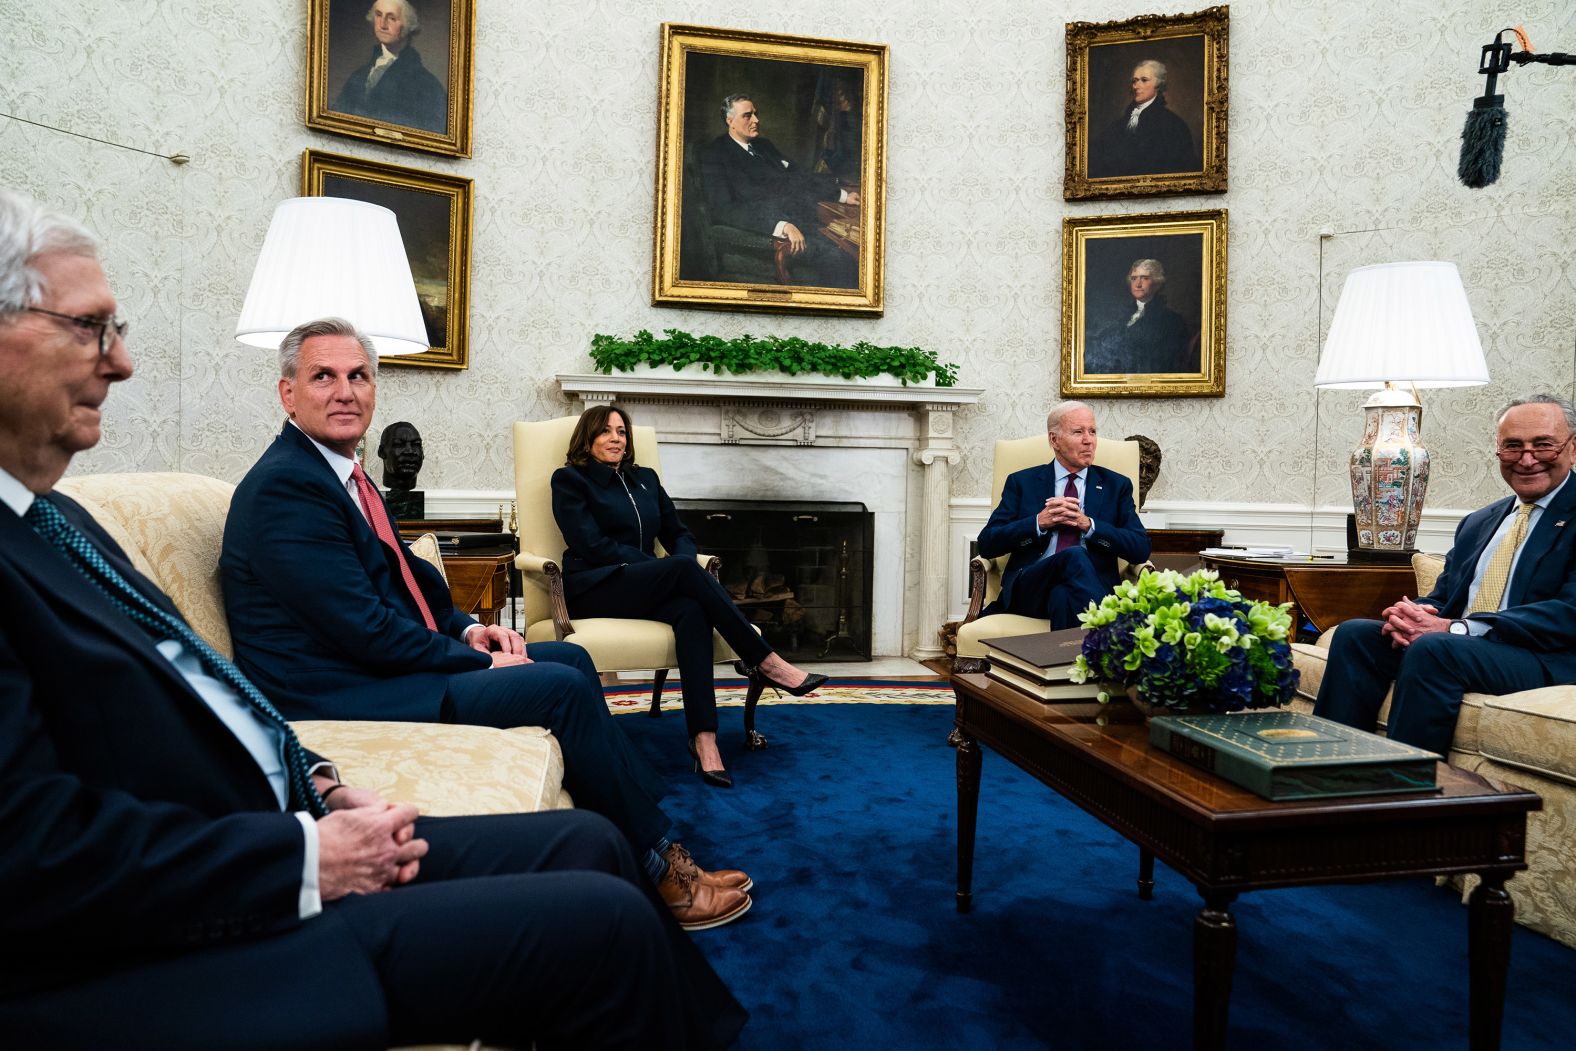 McCarthy, second from left, joins other congressional leaders as <a href="https://www.cnn.com/2023/05/16/politics/biden-kevin-mccarthy-debt-default-negotiations/index.html" target="_blank">they meet with Biden and Harris</a> in the White House Oval Office in May 2023. They were meeting to talk about a deal to raise the nation's borrowing limit and avoid a historic default.